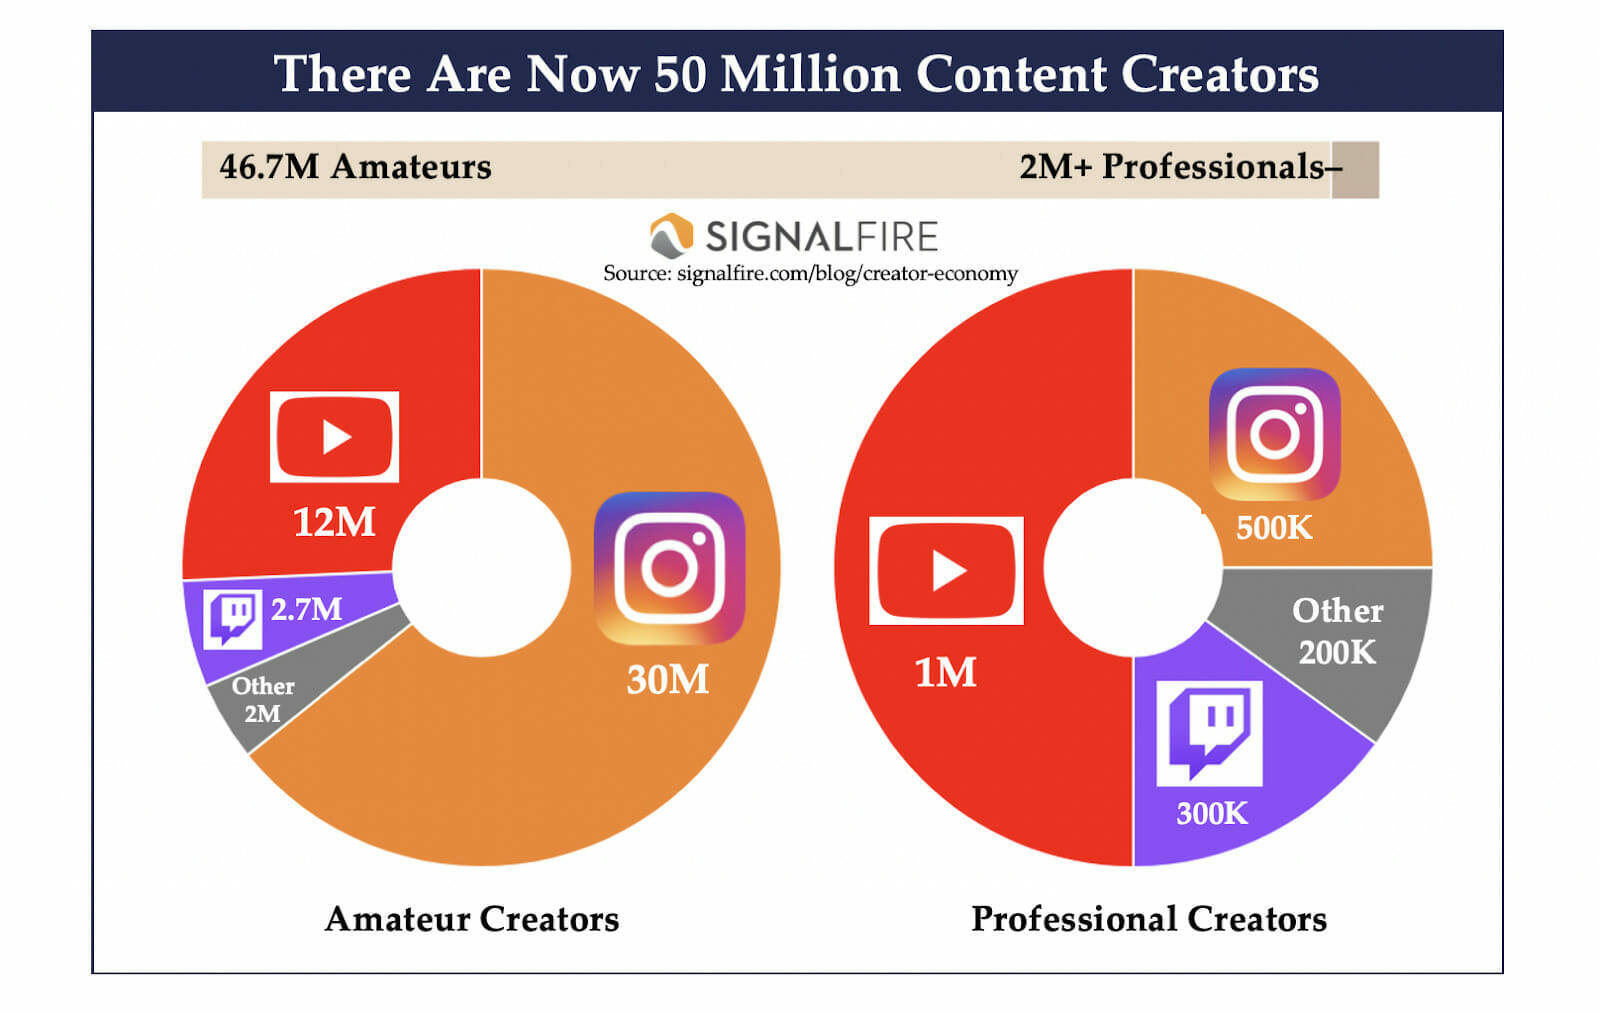 Image showing that there are 50 million content creators